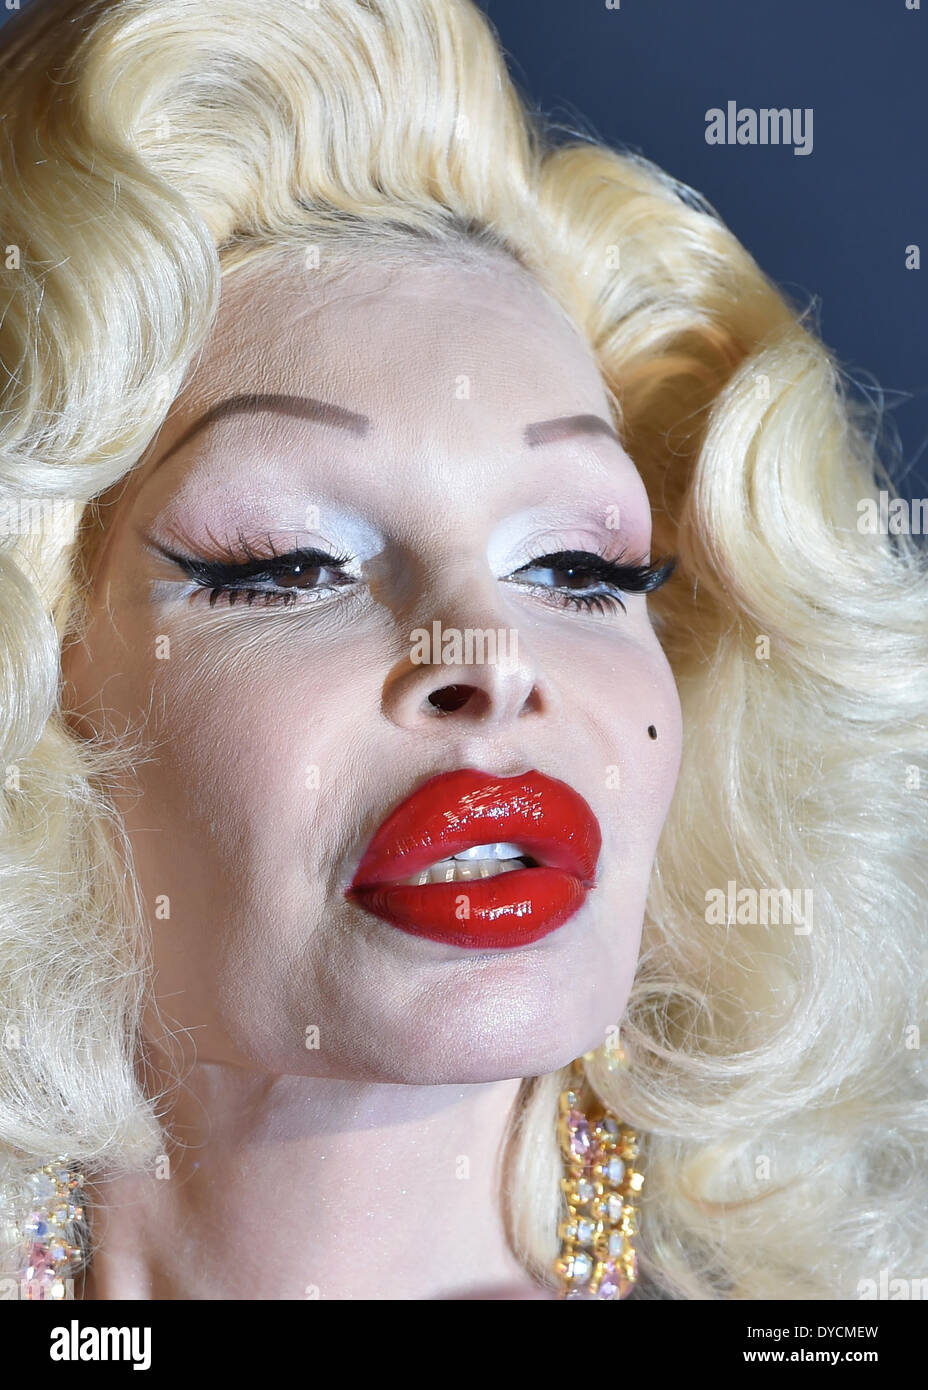 US model, nightlife and fashion icon, performance artist, recording artist and transgender public figure Amanda Lepore arrives for the opening of the first Harald Gloeoeckner store on Georgenstrasse in Berlin, Germany, 14 April 2014. Photo: JENS KALAENE/DPA Stock Photo